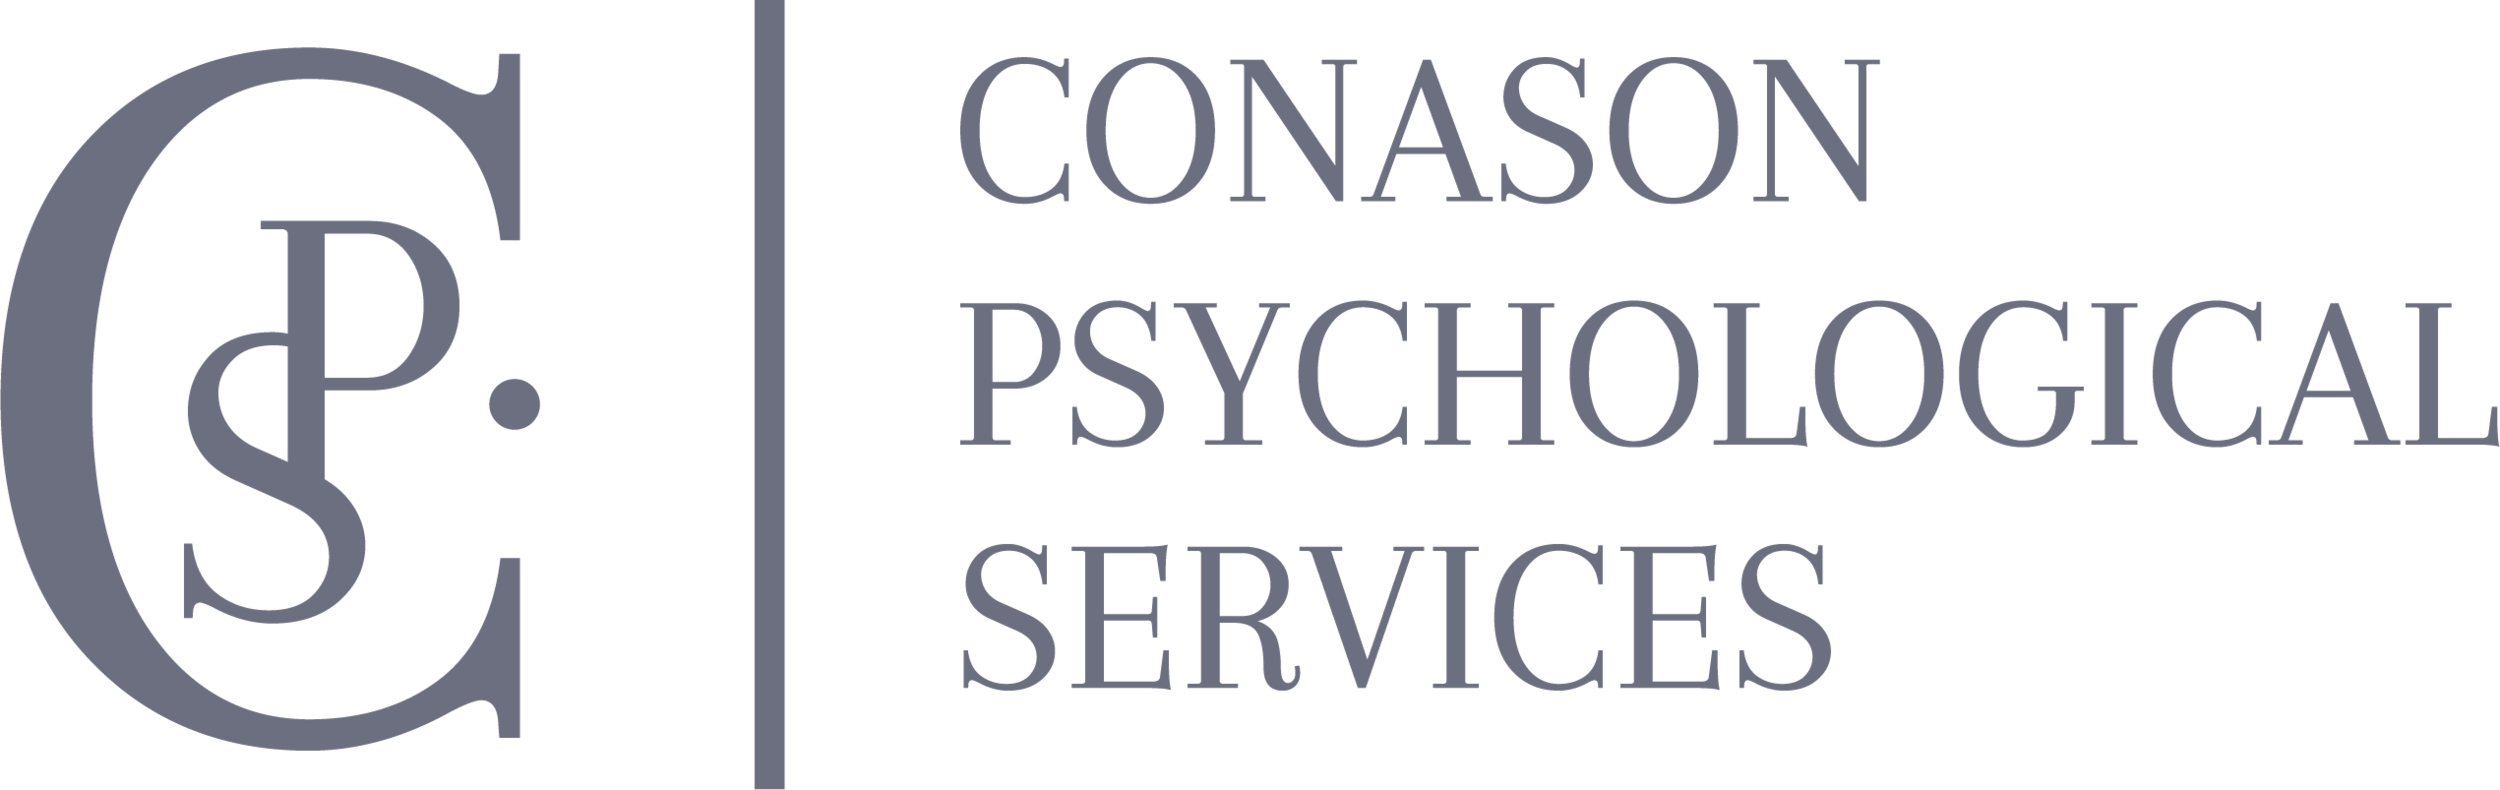 NYC Eating Disorder Therapist | Conason Psychological Services